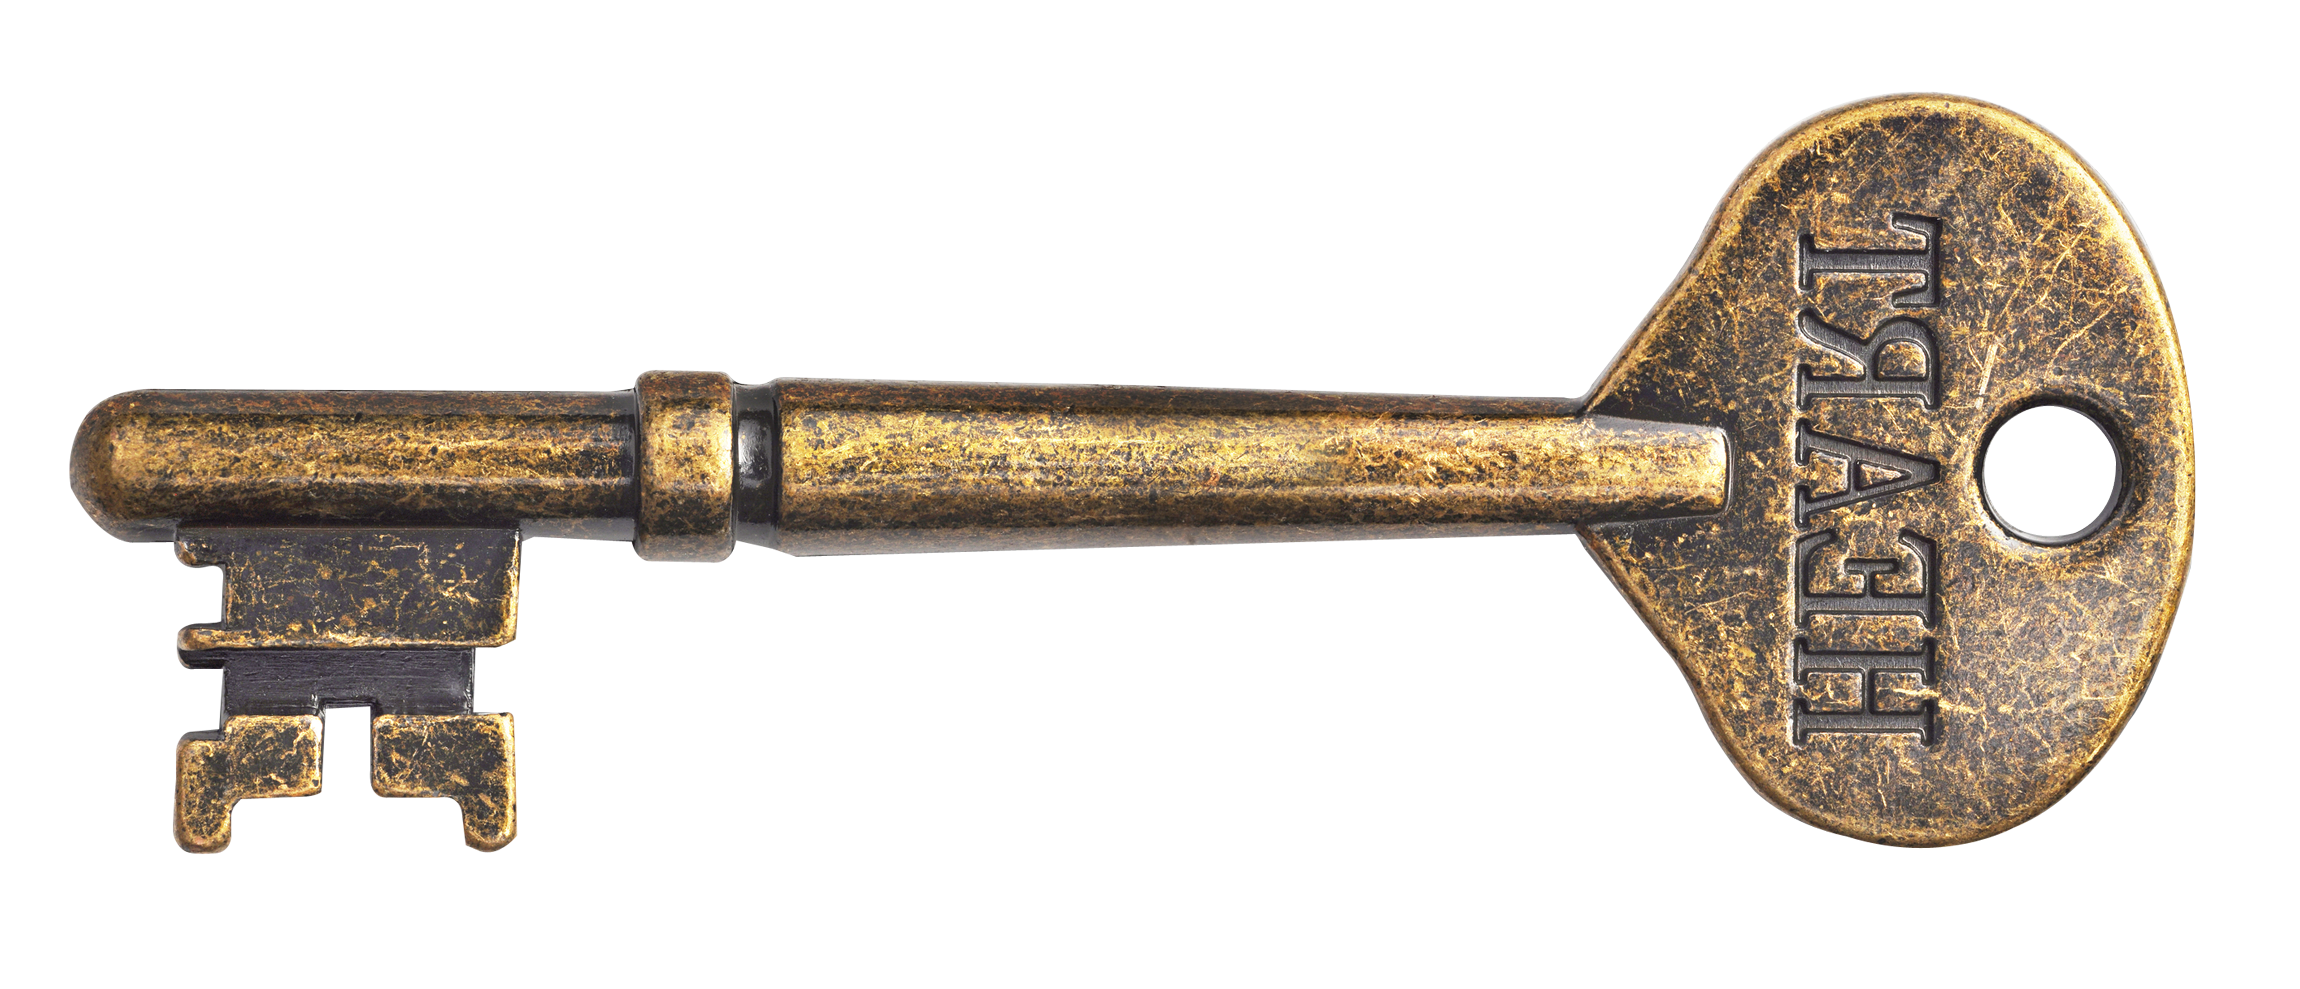 Antique Key Gold PNG Image High Quality PNG Image